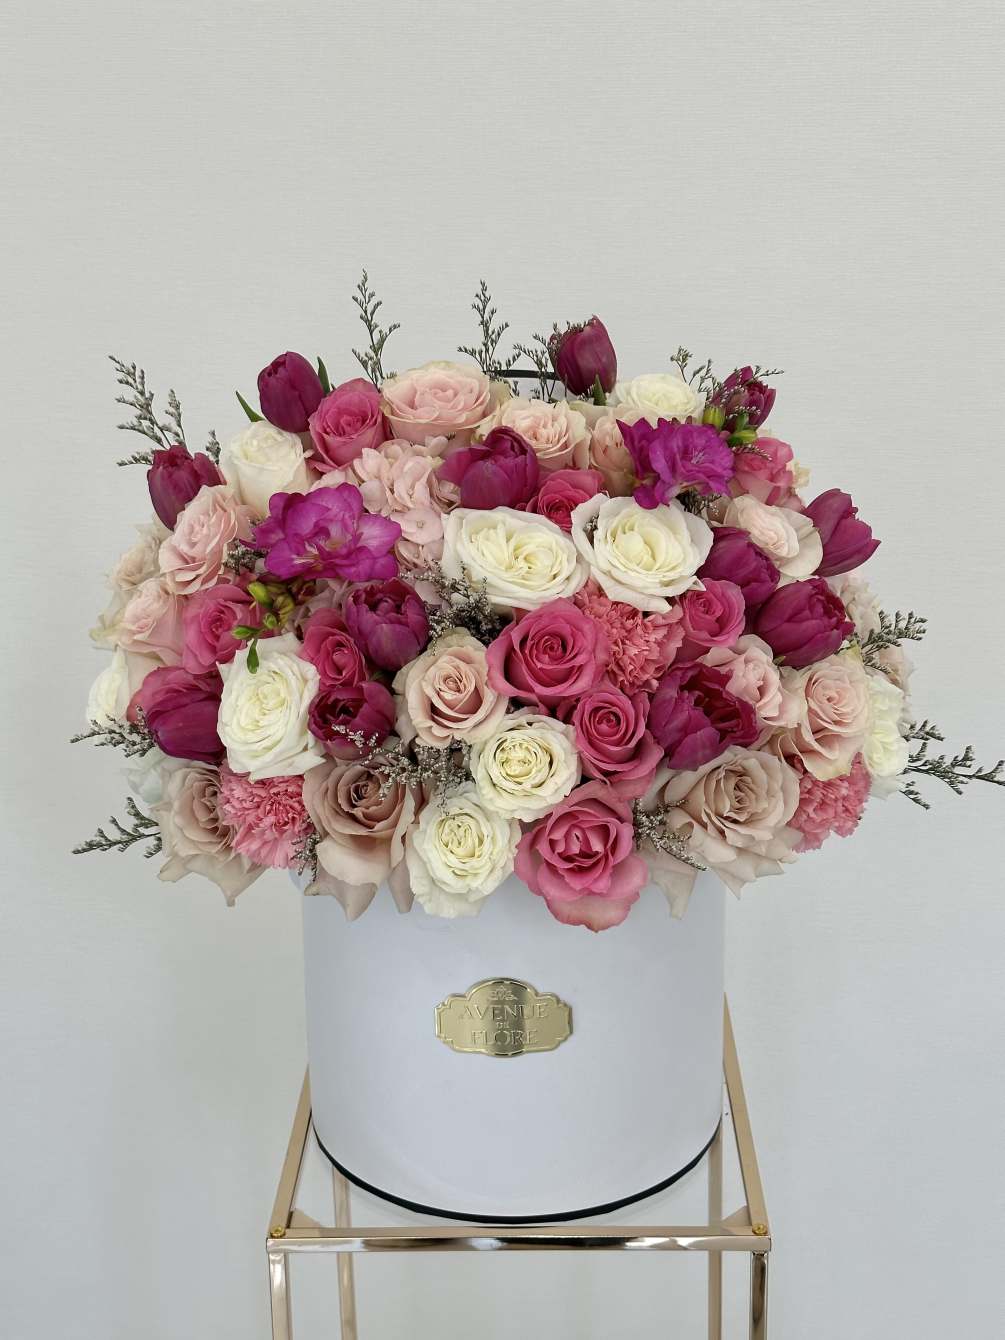 A captivating blend of delicate white and pink blooms presented in a